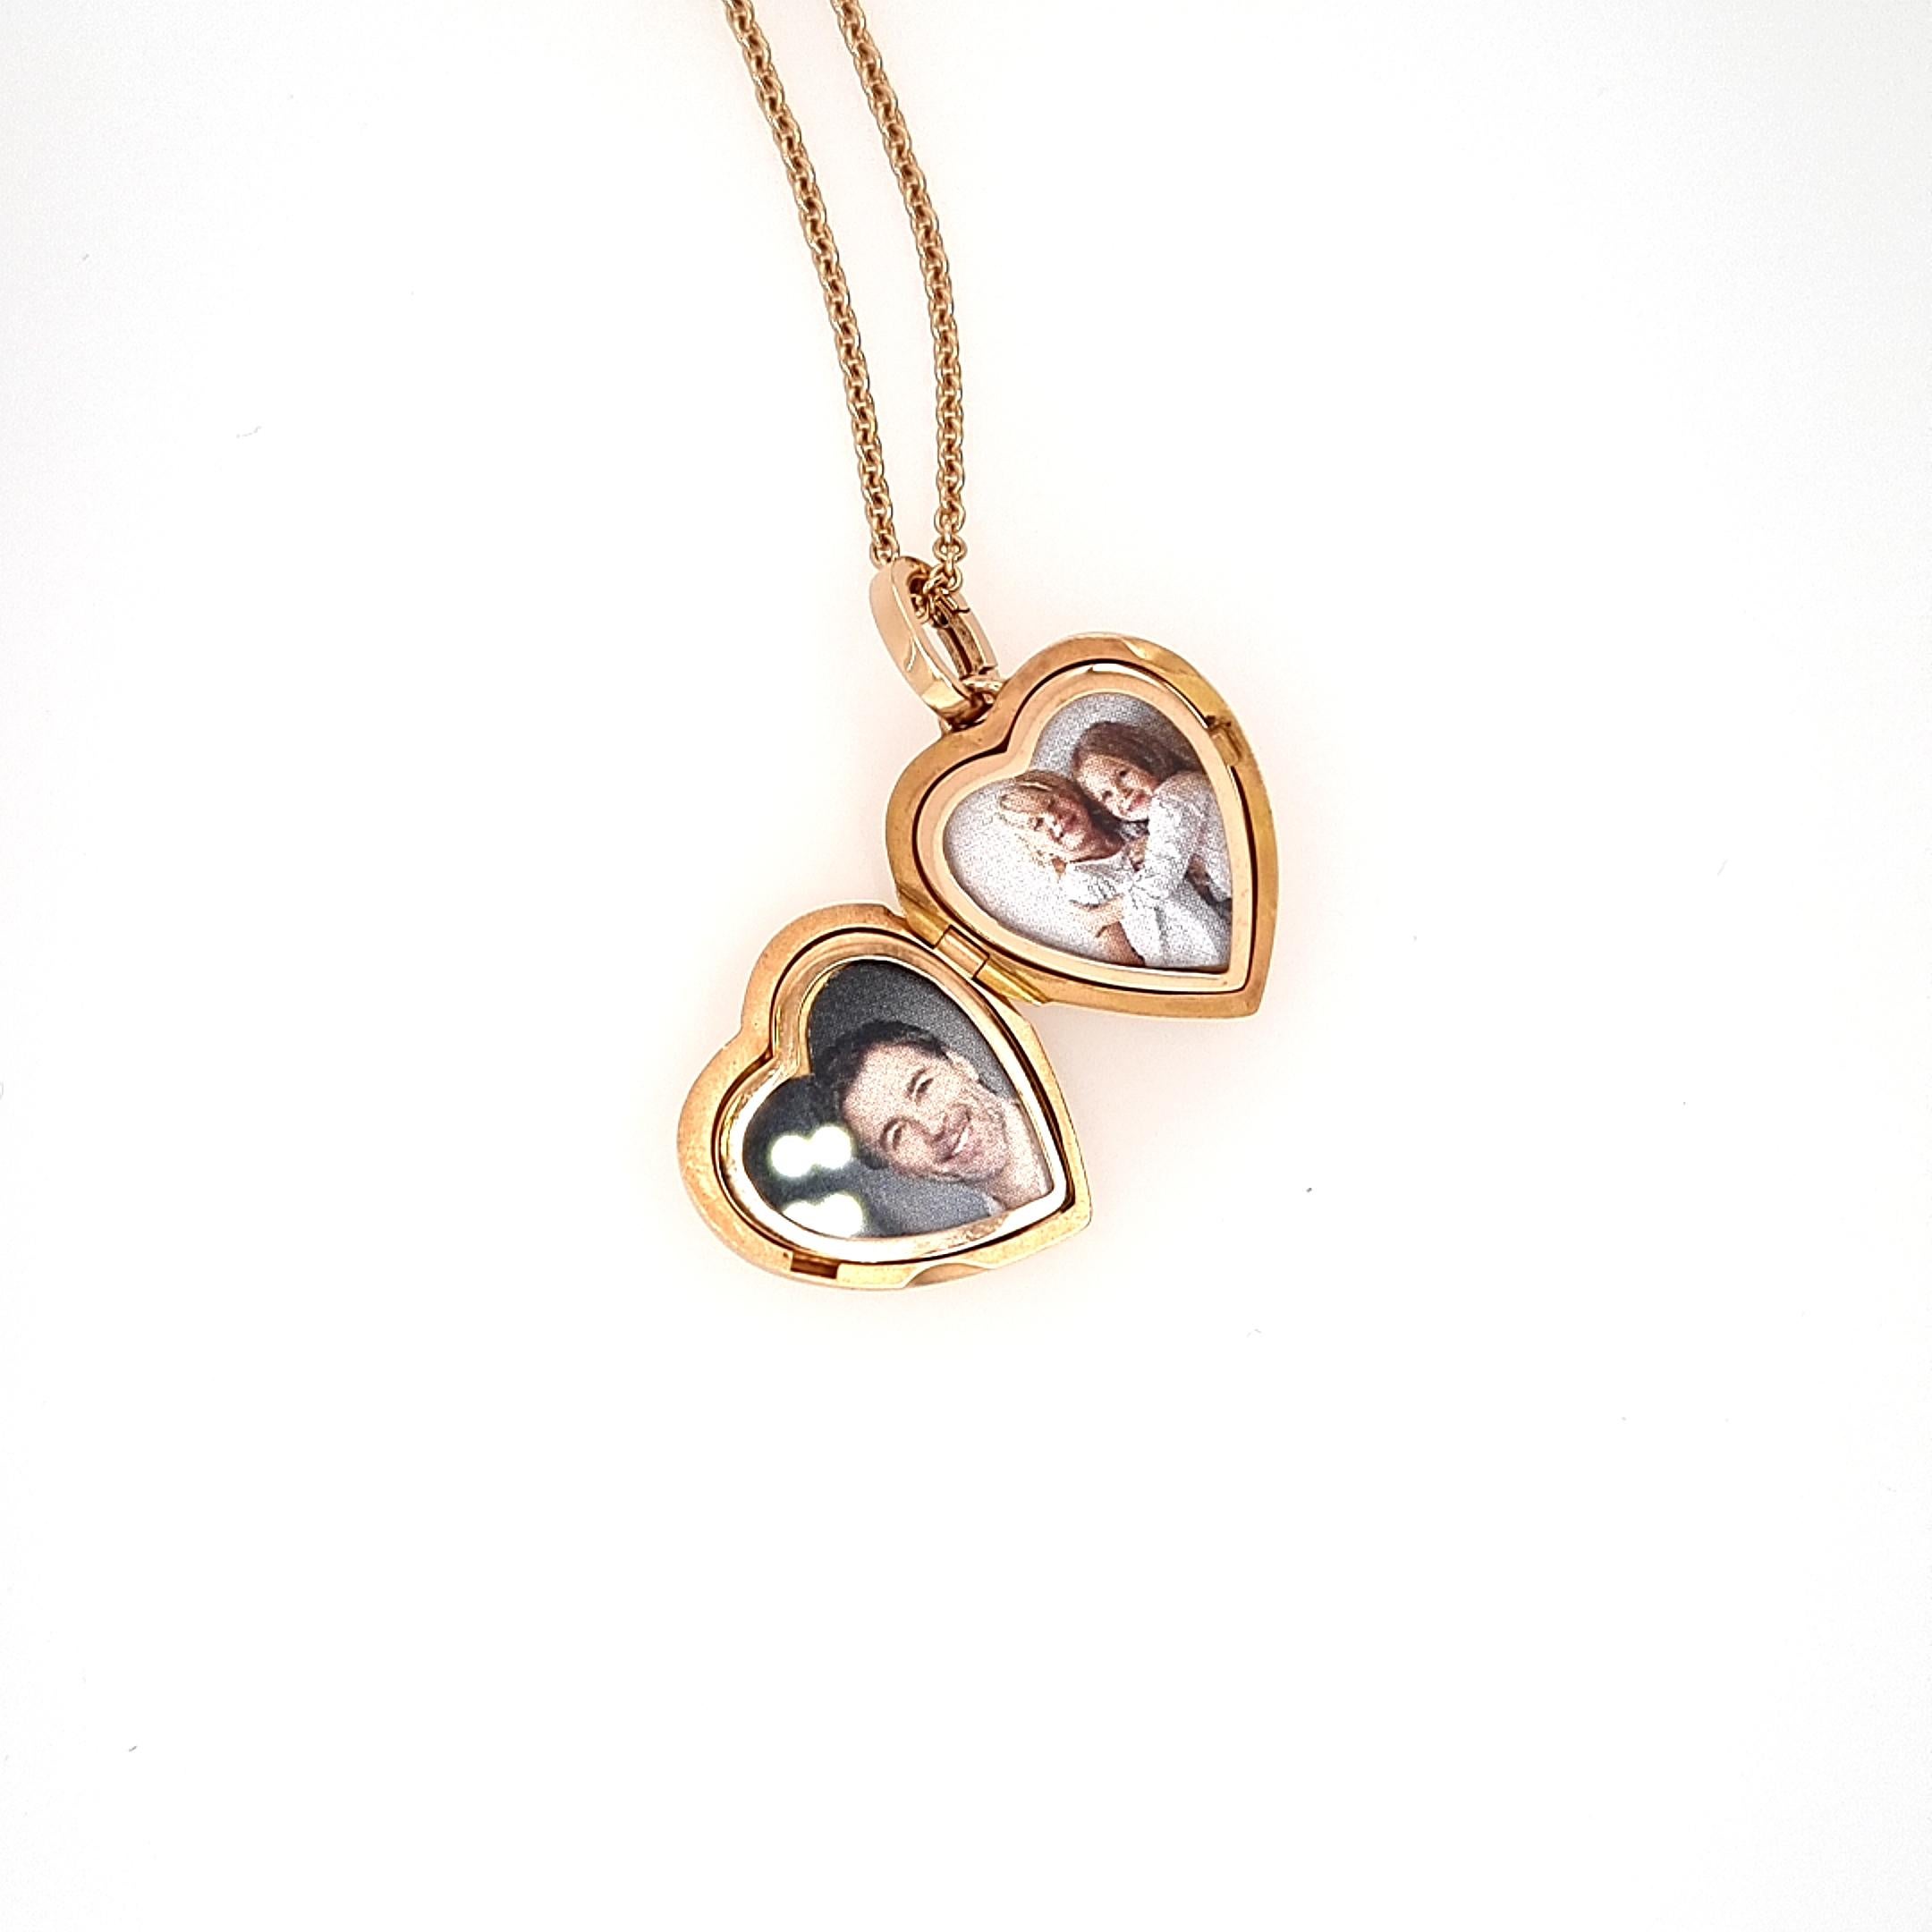 Victorian Heart Shaped Locket Pendant Necklace, 18k Rose Gold, 8 Diamonds 0.16ct For Sale